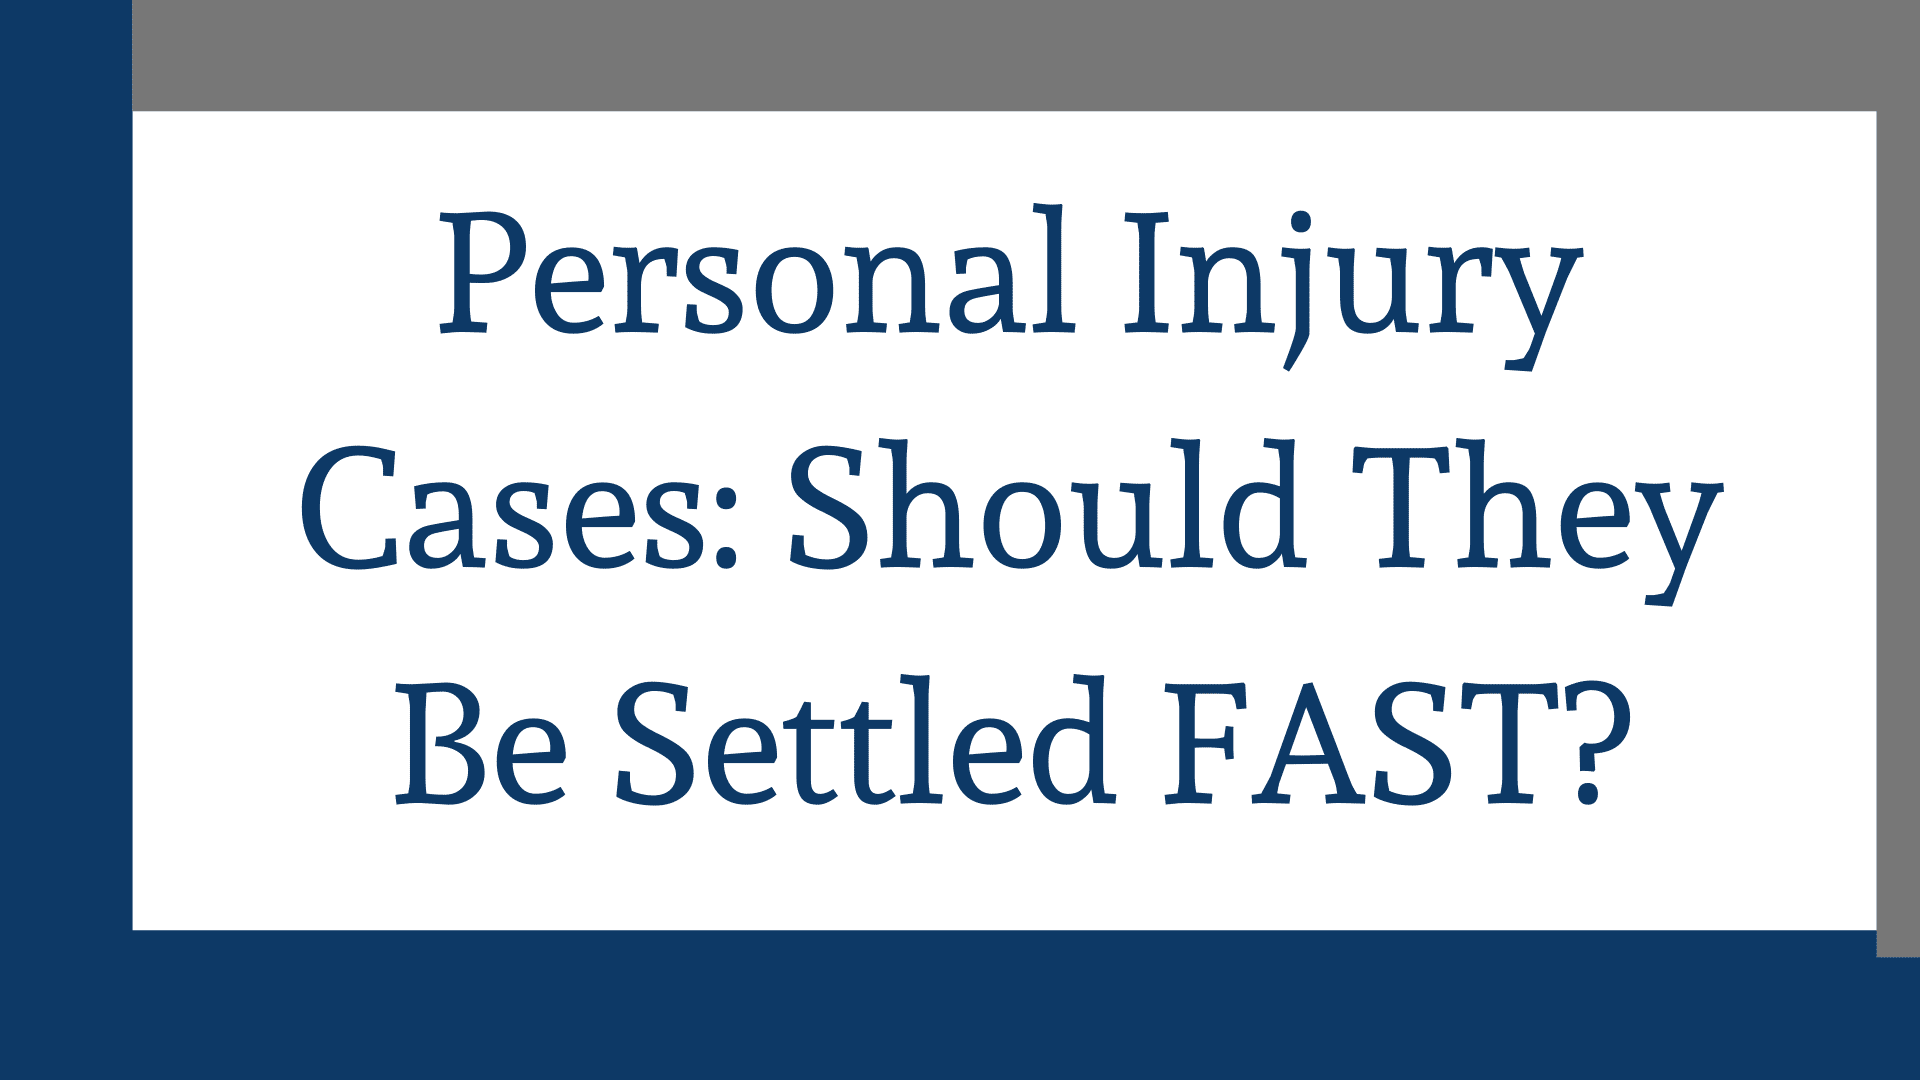 Orlando Personal Injury Lawyer Settles Fast